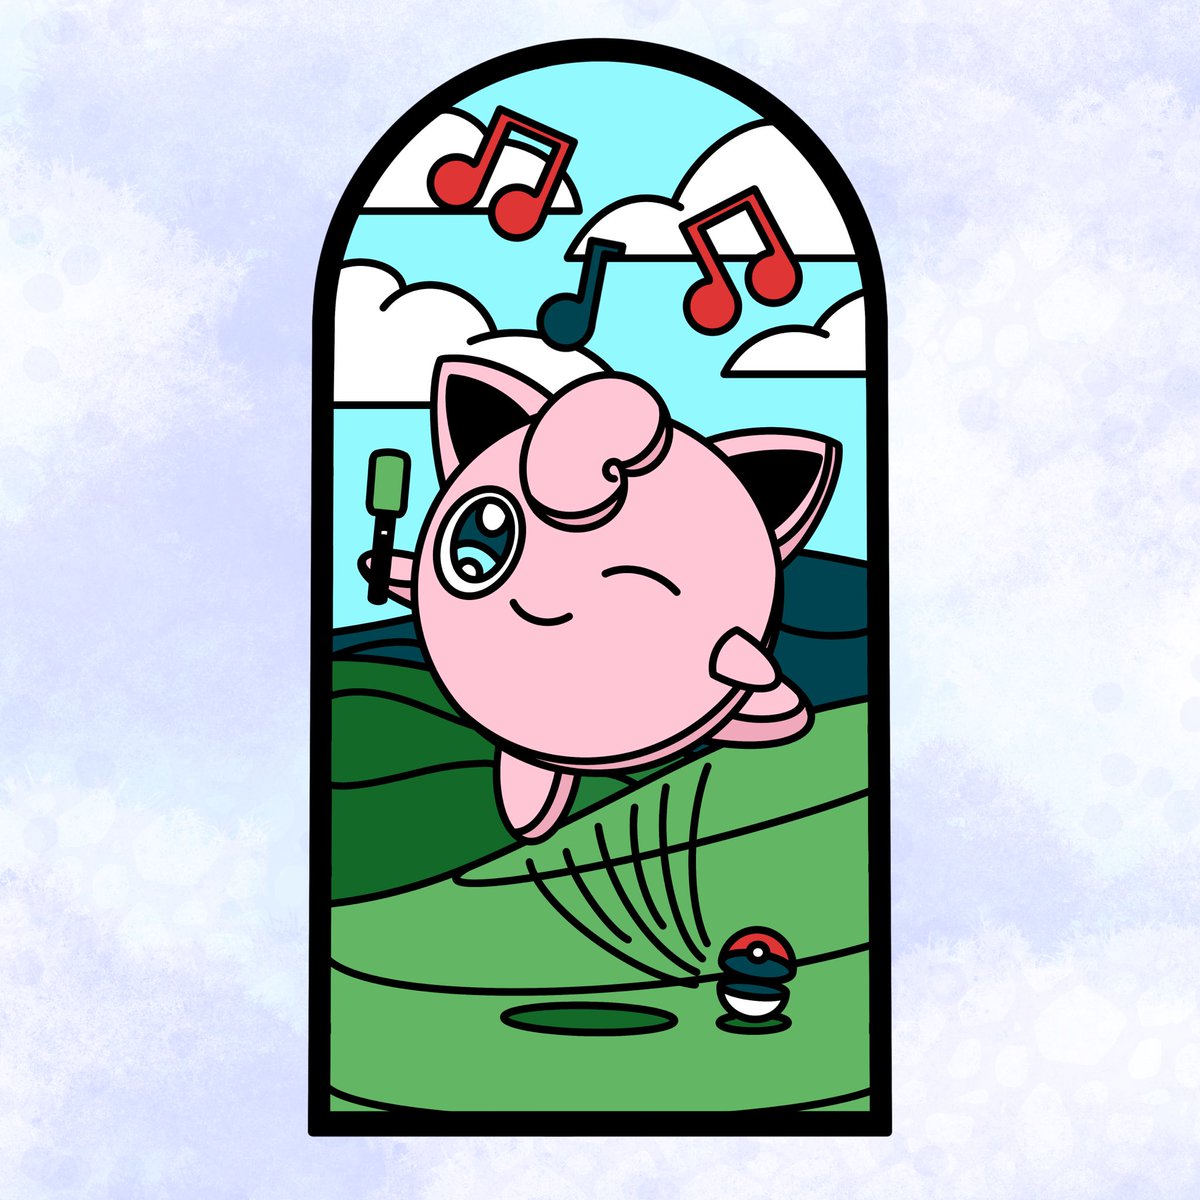 Jigglypuff joins the battle!!

We’ve reached the final week of the #SmashBrosSaturday series, and I had to finish with my ride or die, Jigglypuff 💗

#Nintendo #NintendoFanArt #SuperSmashBros #N64 #SmashBros #Jigglypuff #Pokemon #StainedGlass #DigitalArt #DigitalIllustration